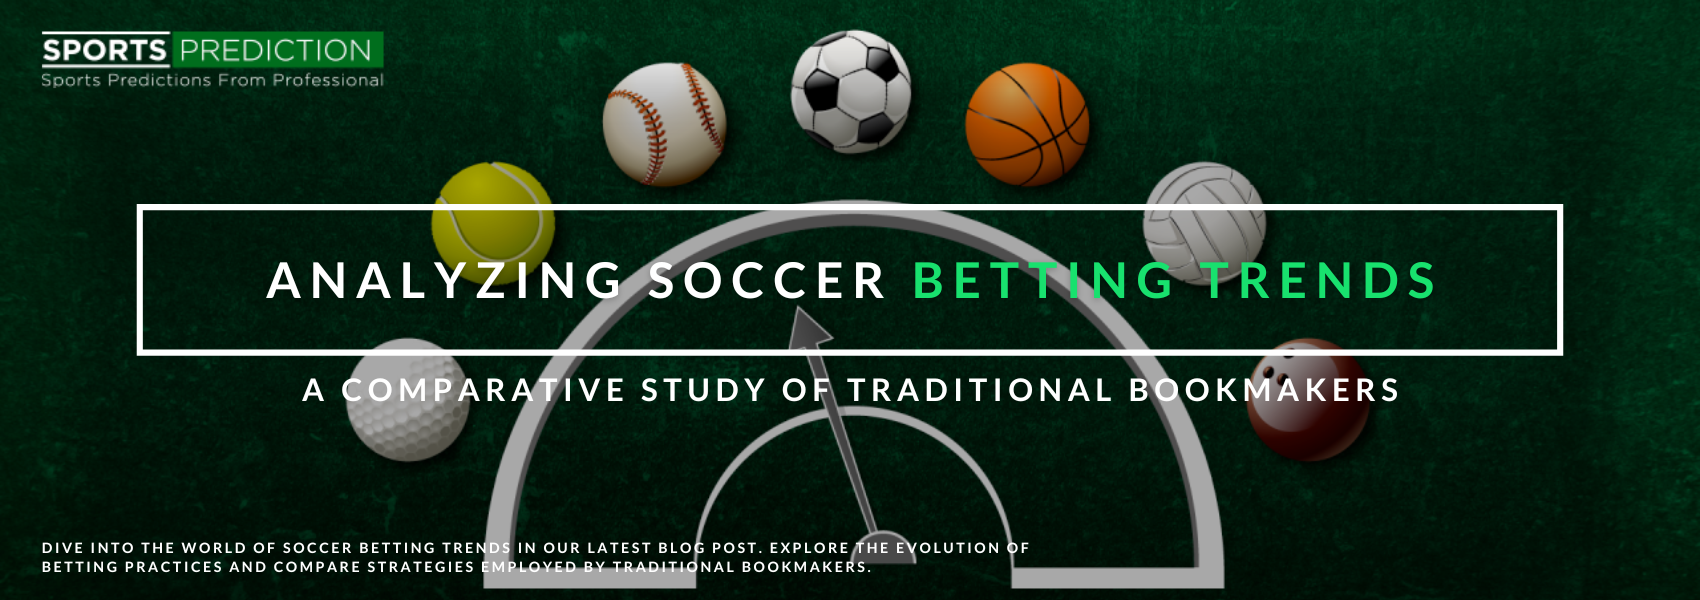 Exploring Soccer Betting Trends From Traditional Bookmakers